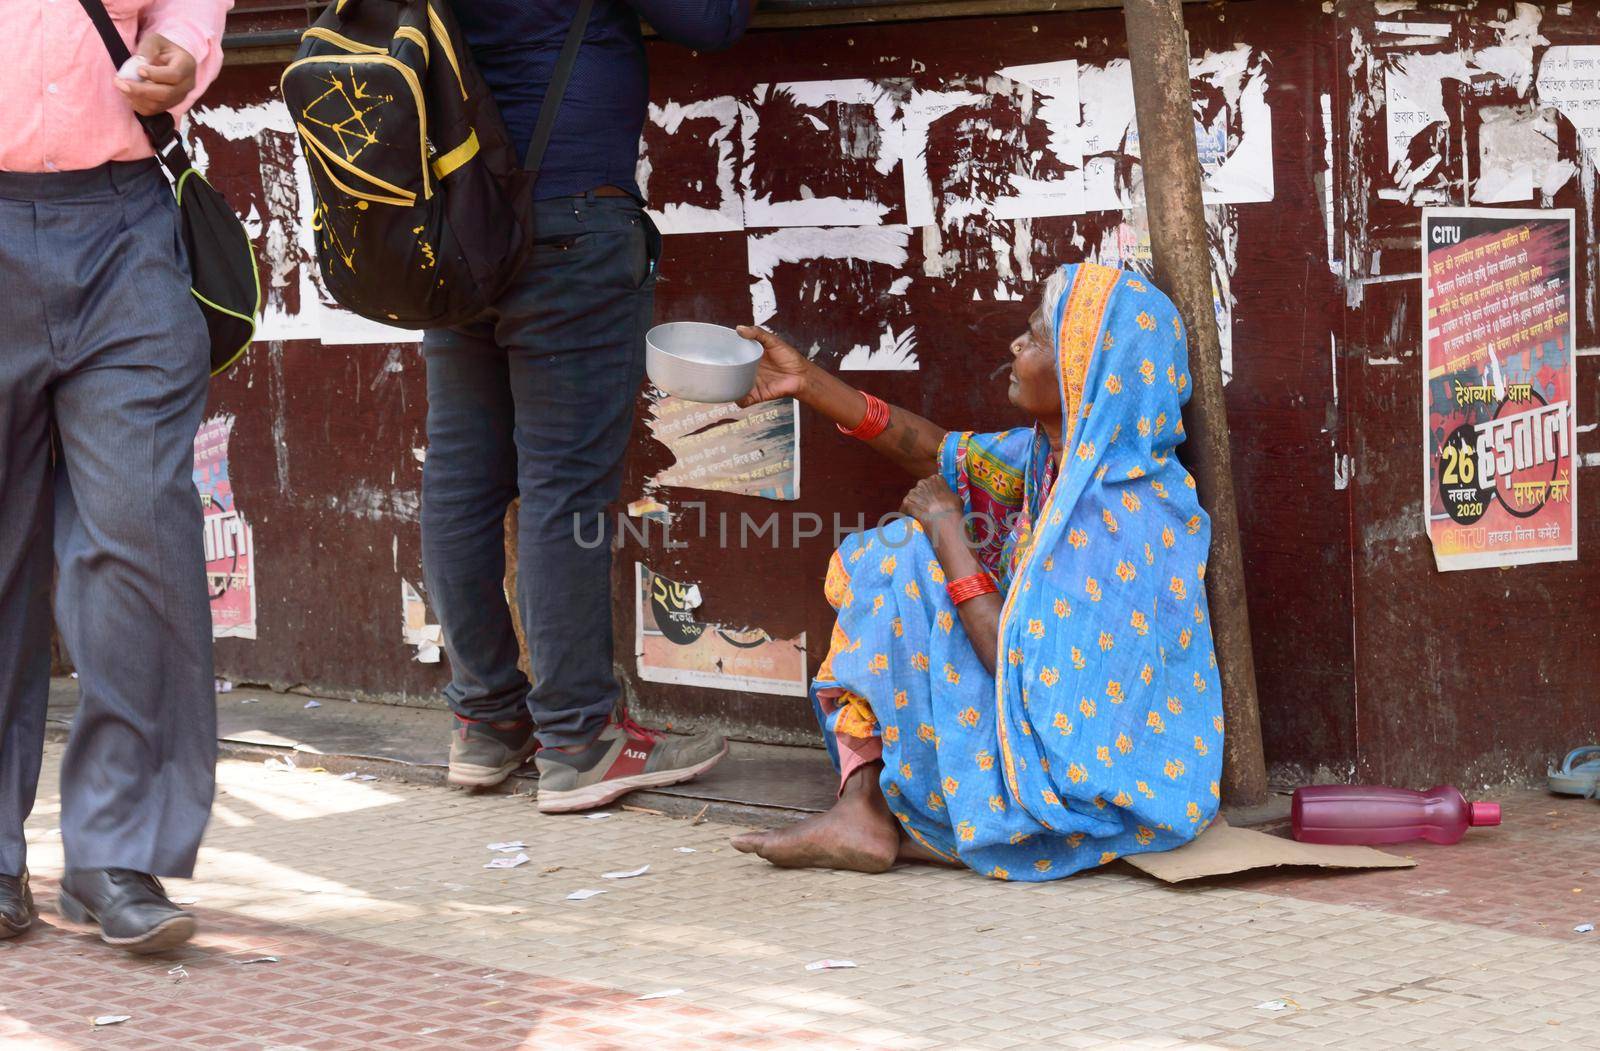 Old elderly Homeless woman begging in the city street corner of Kolkata, West Bengal, India South Asia Pacific March 15, 2021 by sudiptabhowmick